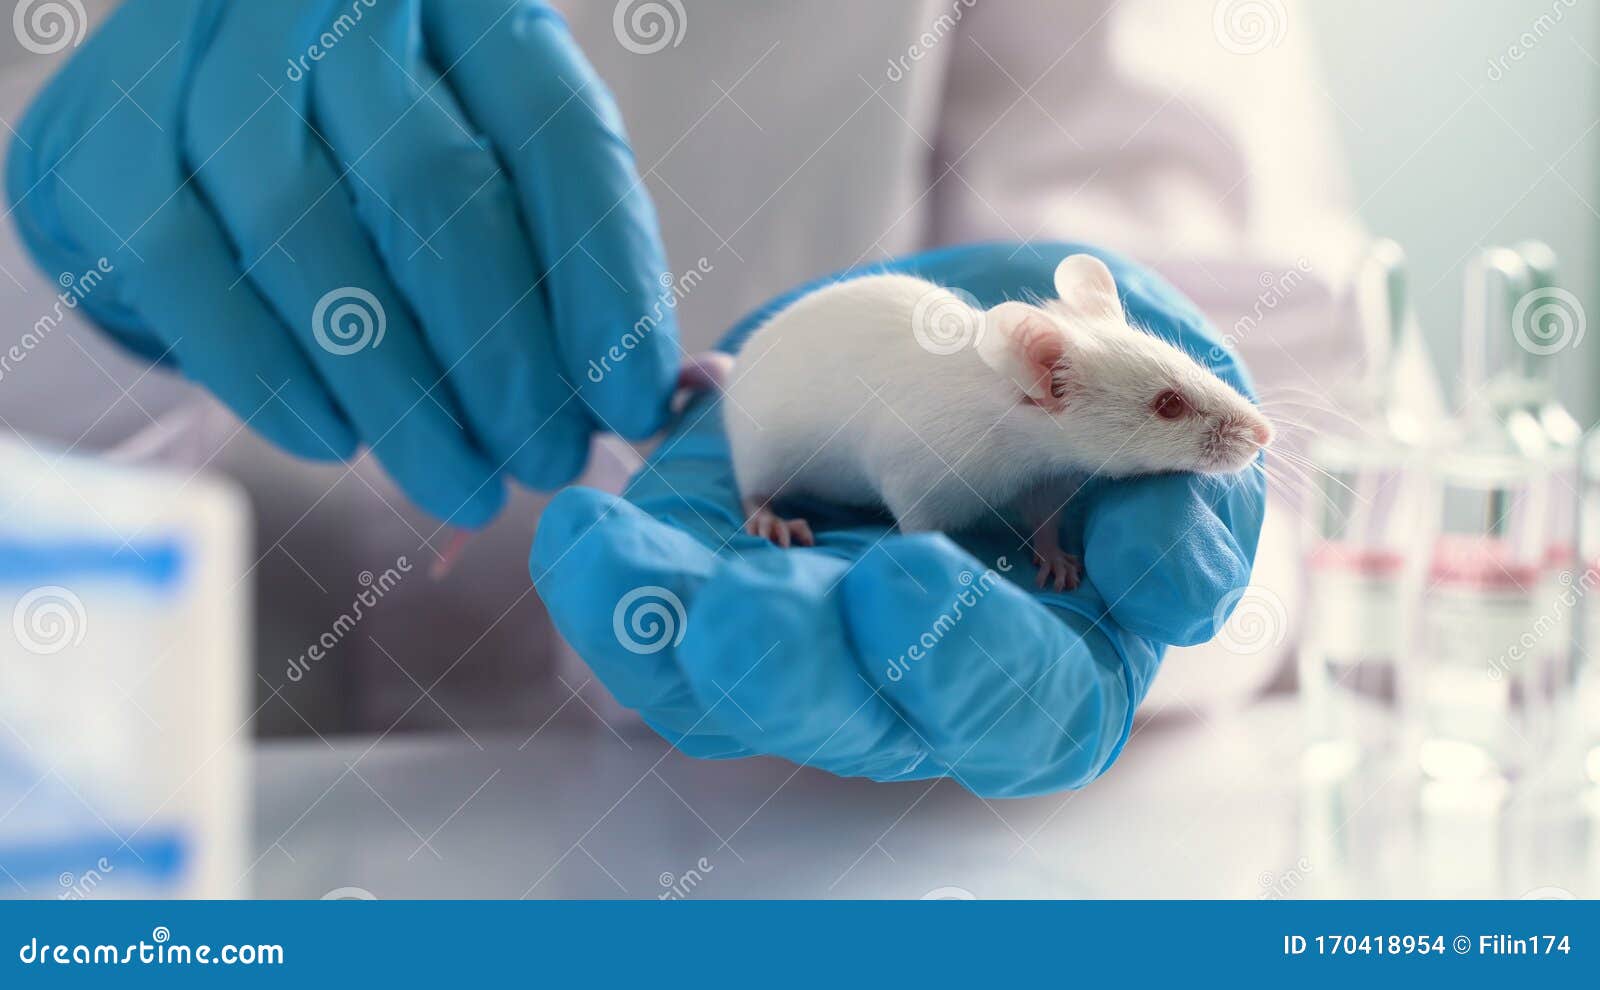 subcutaneous injection in mice